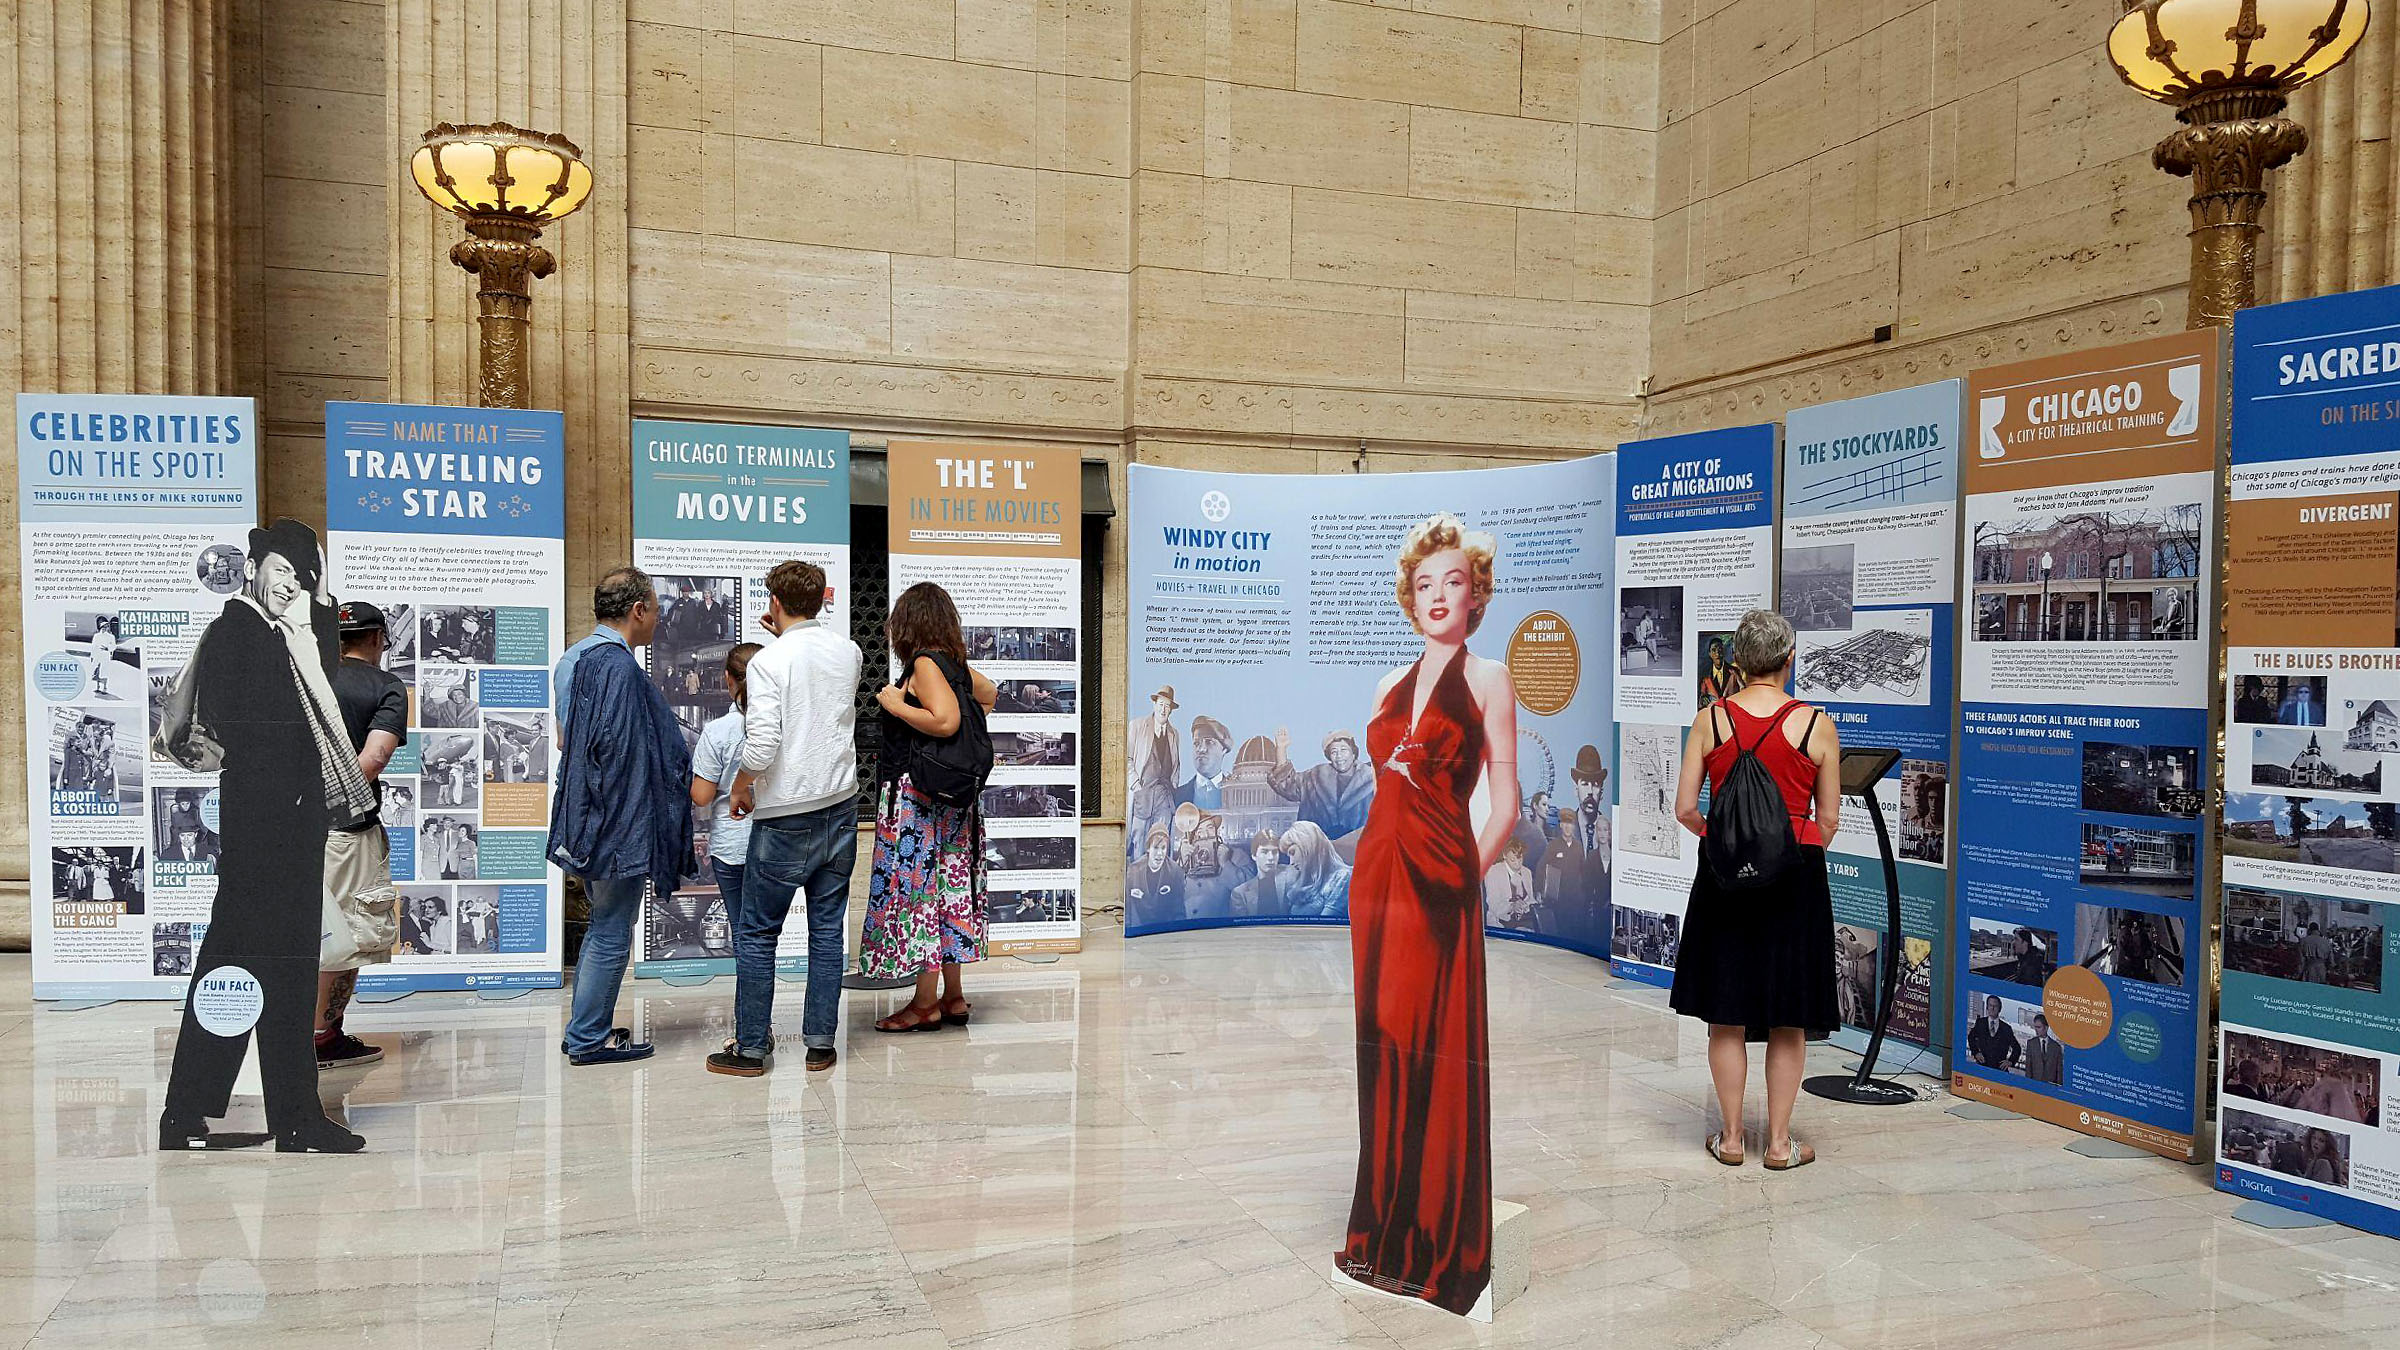 Windy City in Motion exhibit at Union Station in Chicago